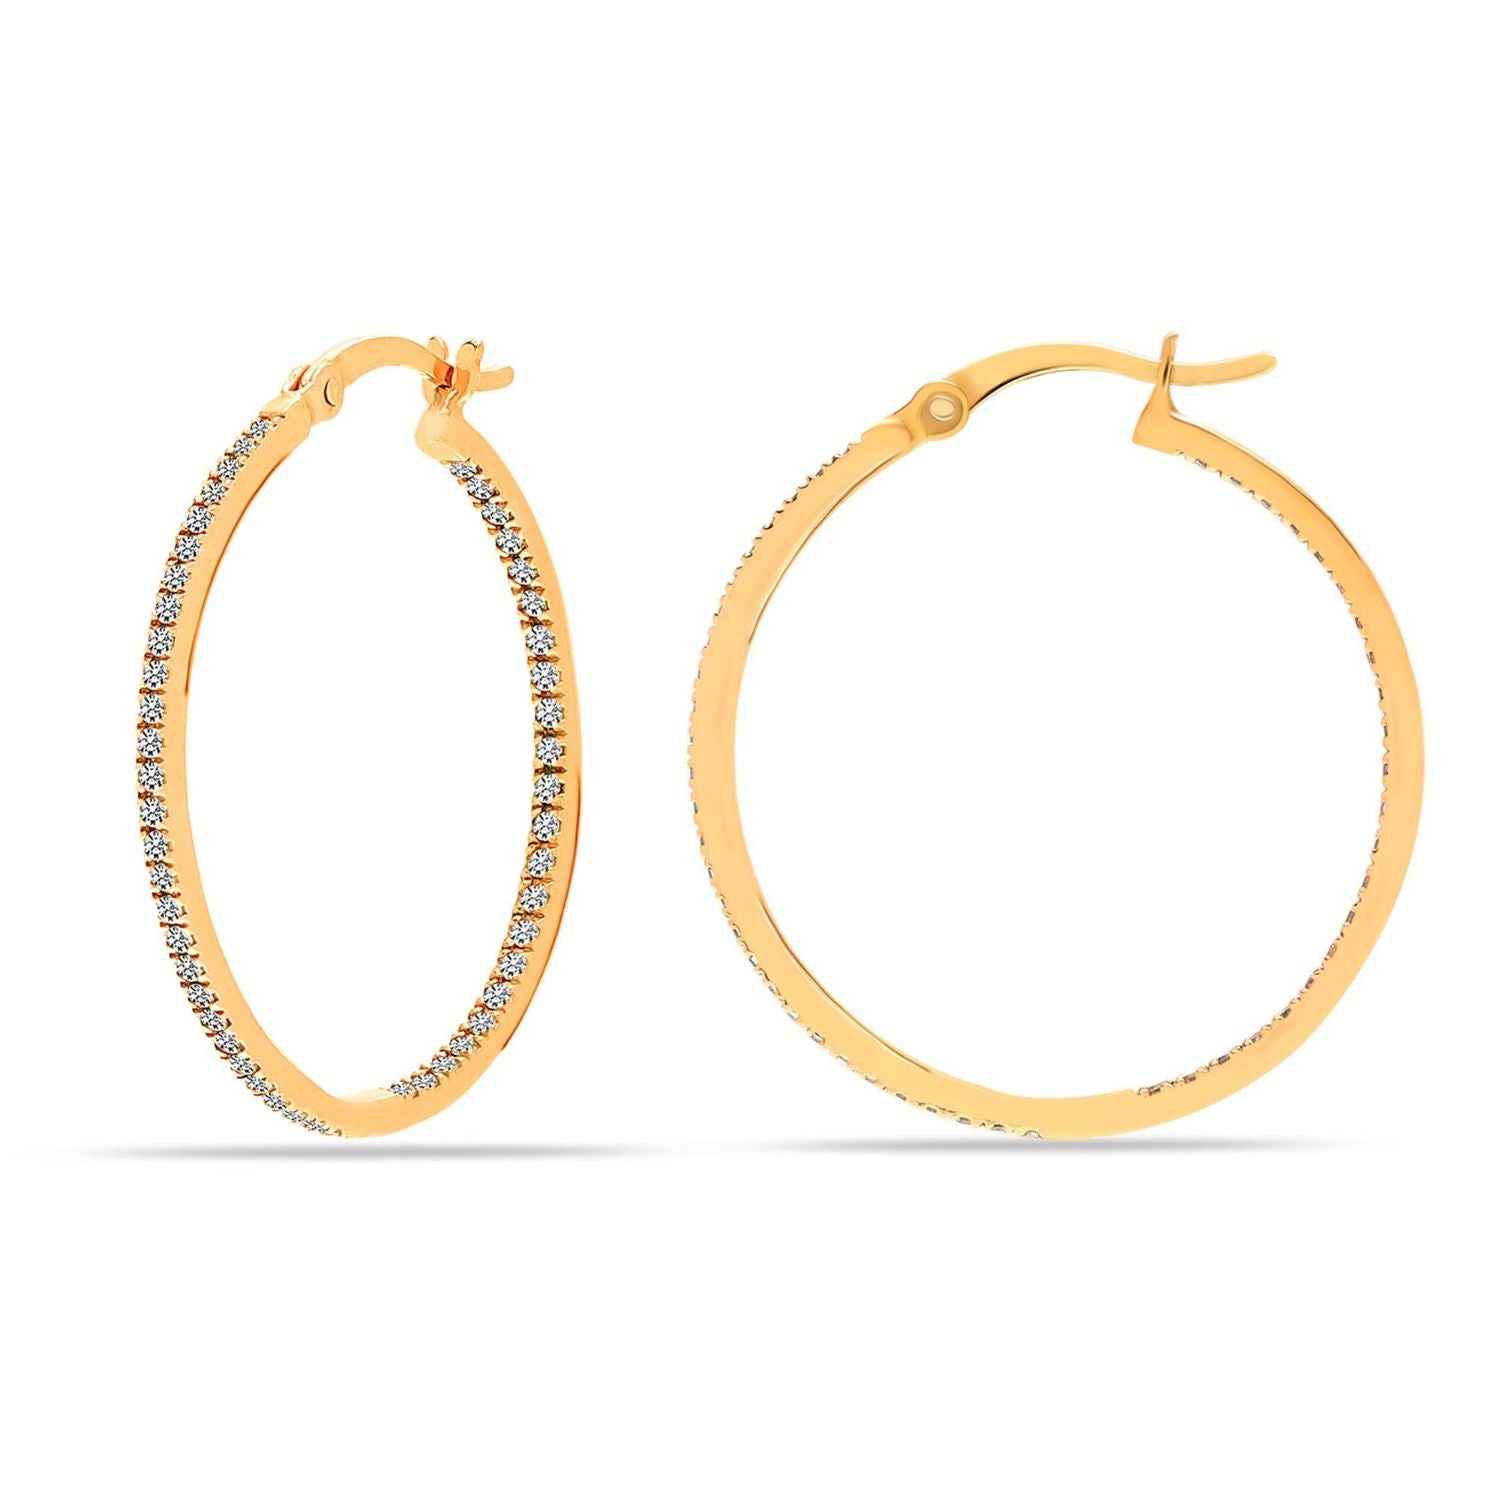 925 Sterling Silver Gold Plated Round CZ Hoop Earrings for Women and Girls